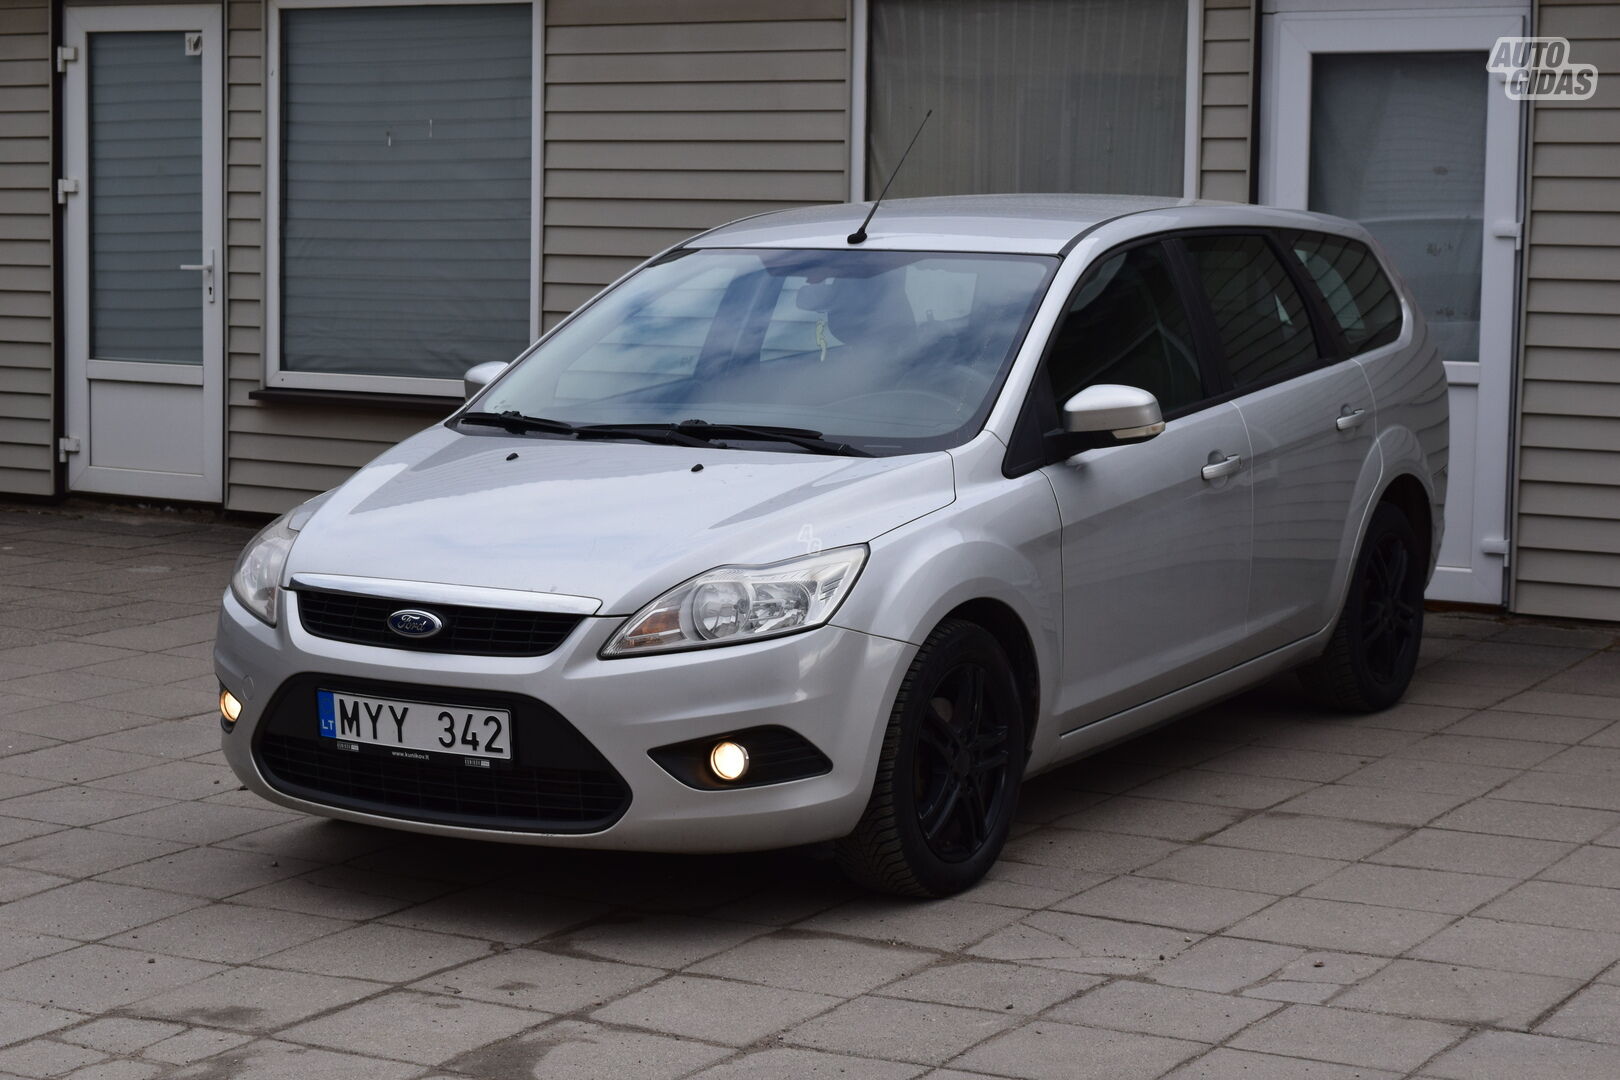 Ford Focus TDCi Amber X 2008 г